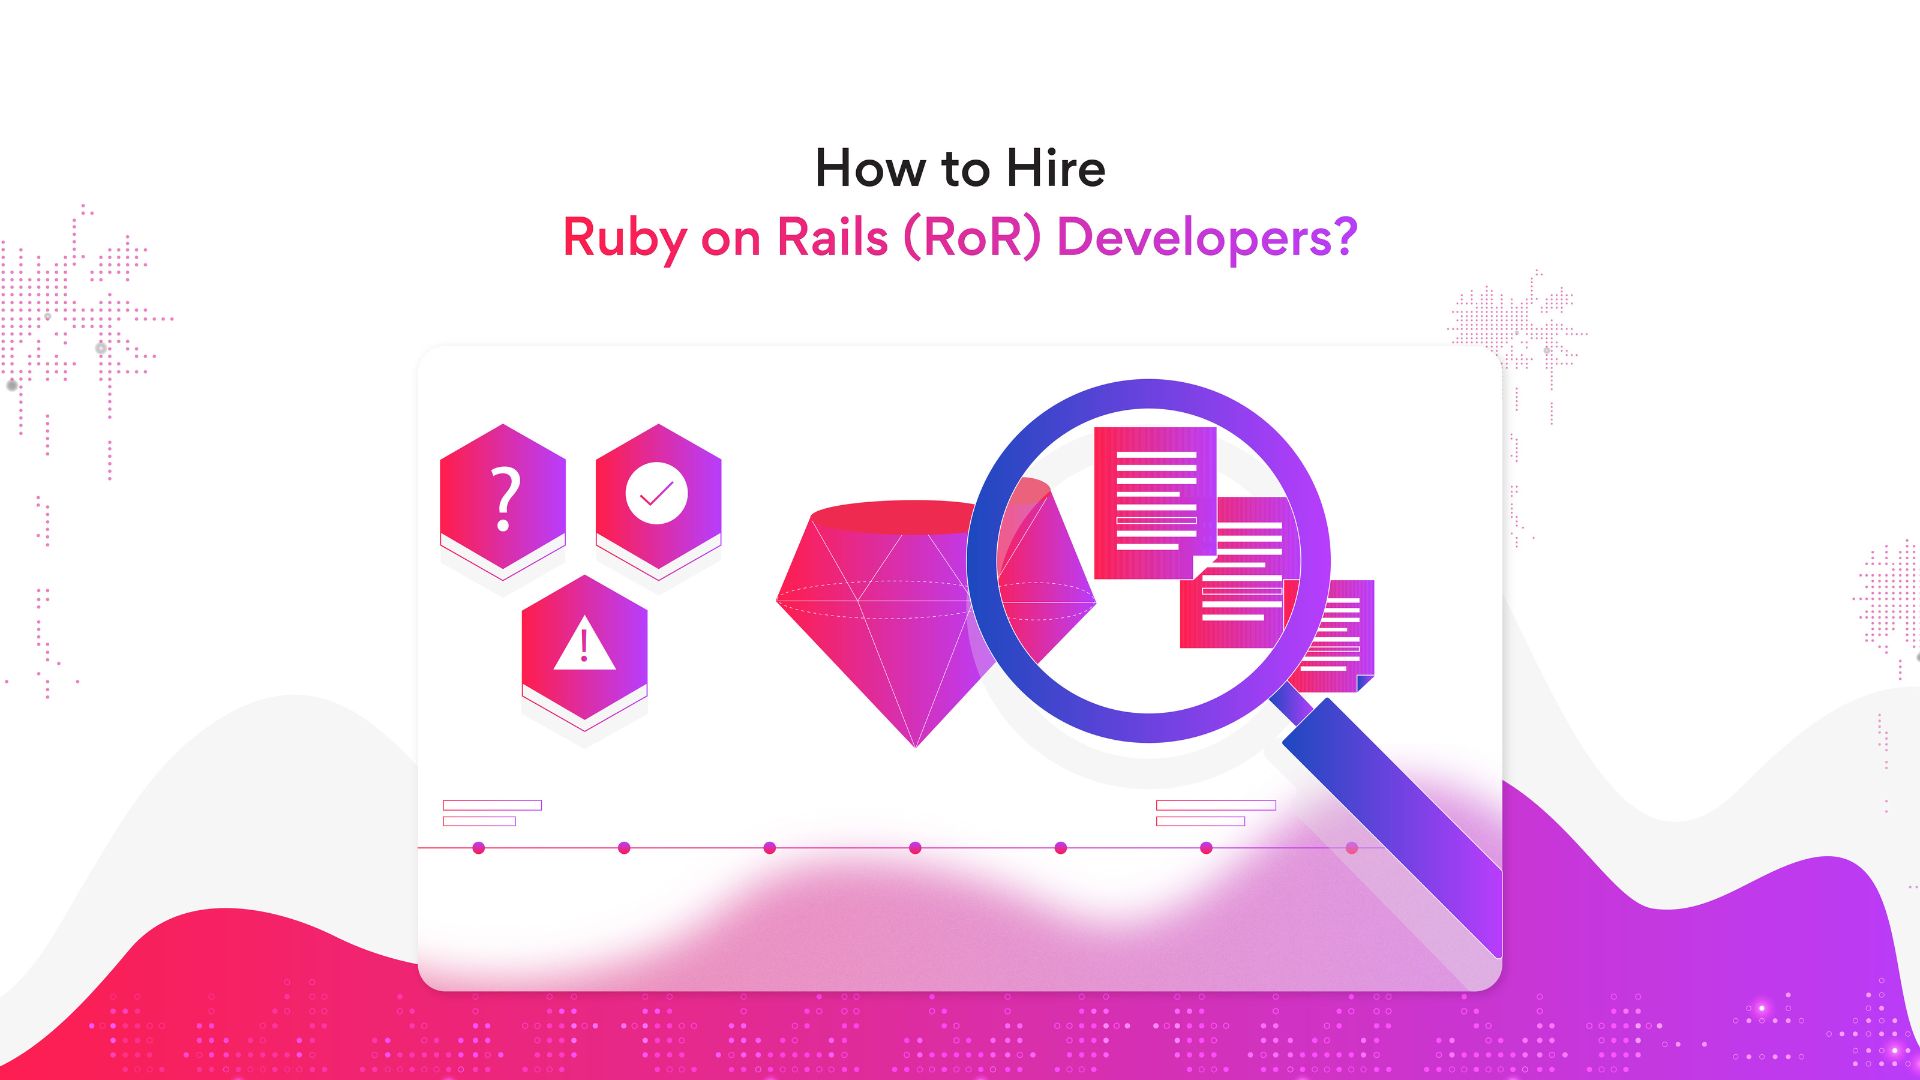 Hire Ruby on Rails Developers for Your Company in 2022